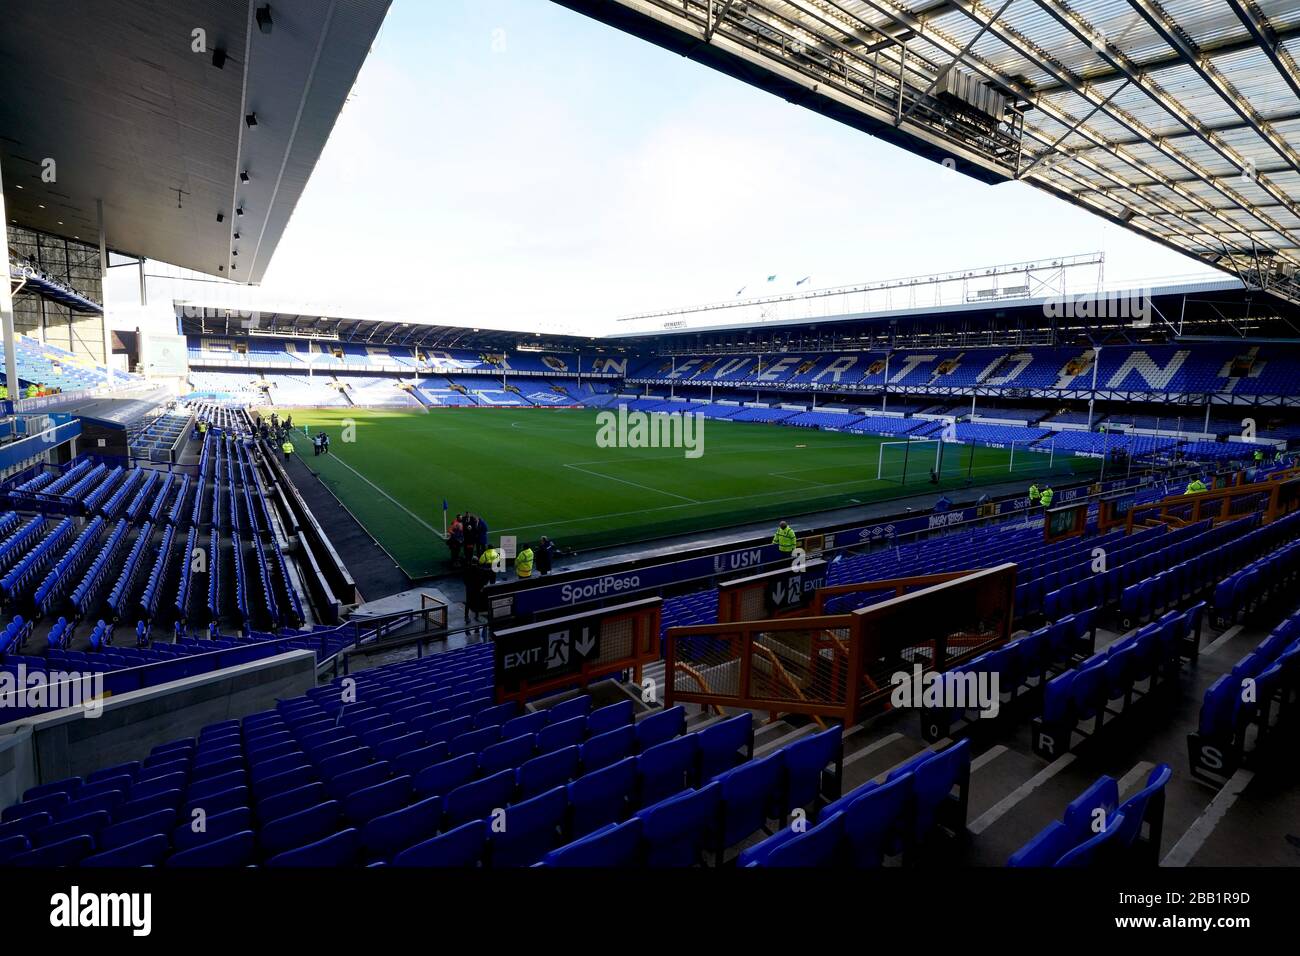 A general view of the Goodison Park stadium Stock Photo